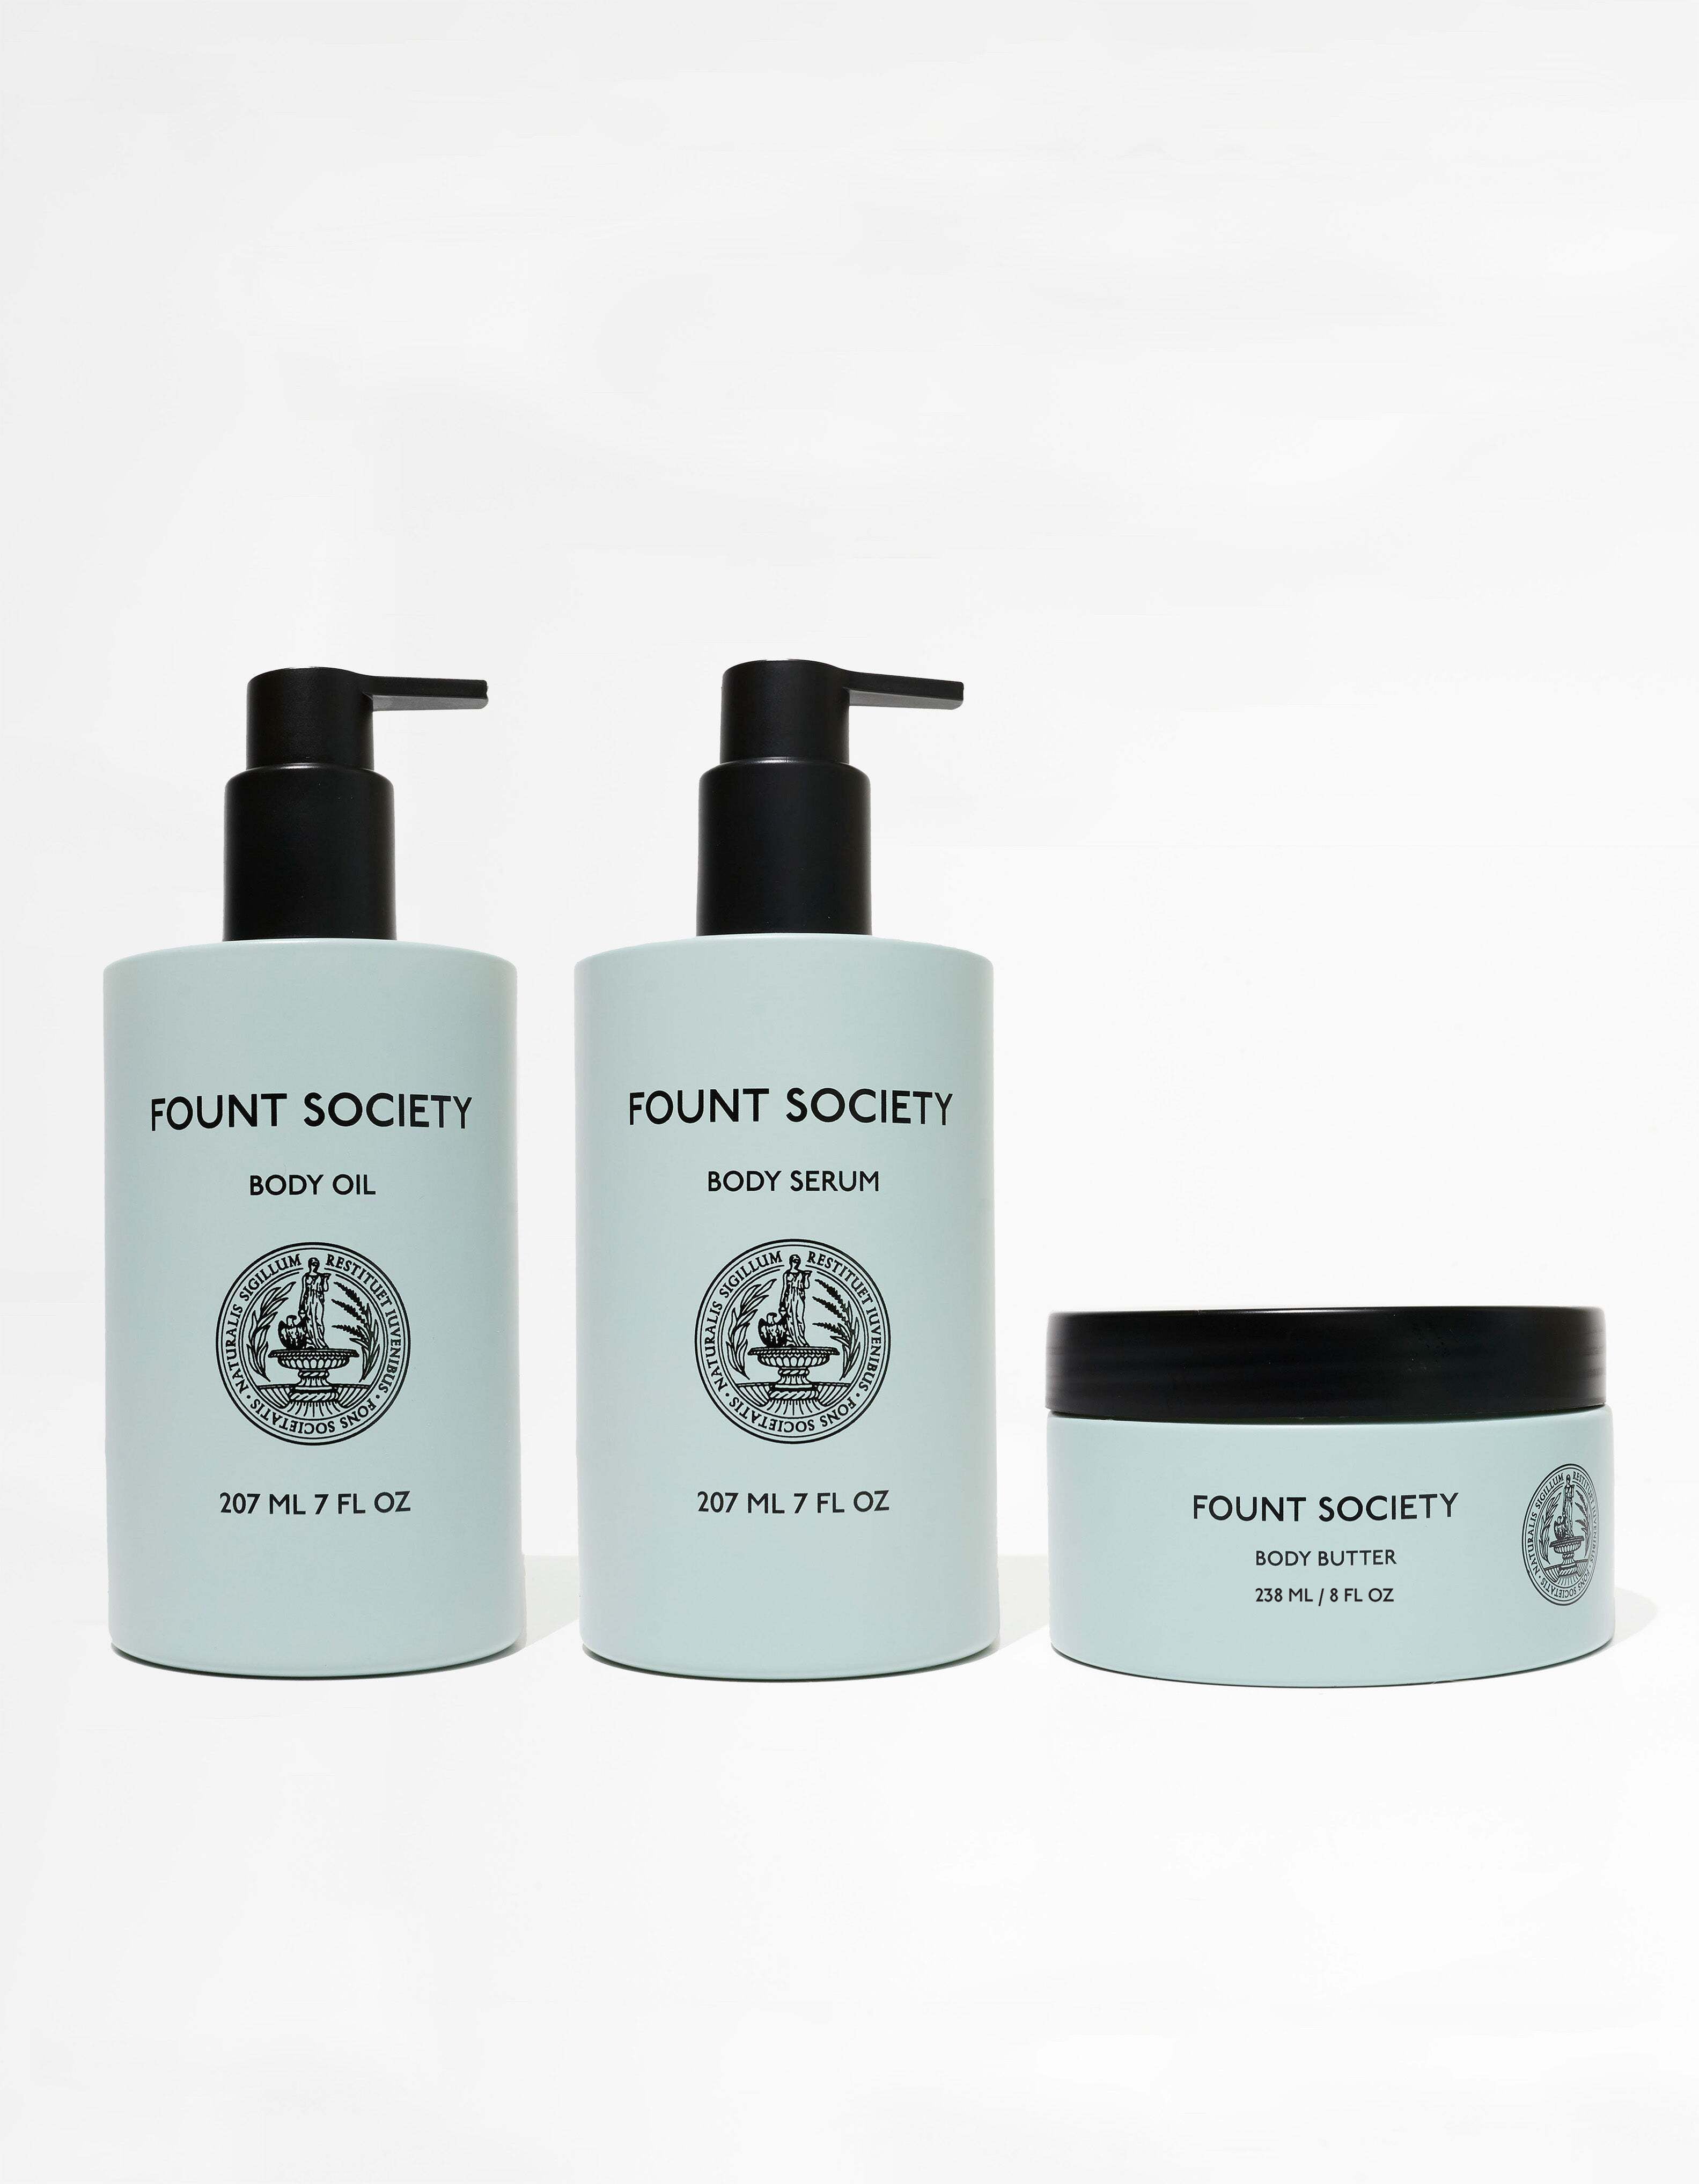 Image shows three skincare products from the brand Cozy Earth. From left to right: a bottle of Body Oil with a pump, a bottle of Body Serum with a pump, and a jar of Body Butter with a screw-on lid. All containers are light blue with black text and logos, collectively named the Moisture Trio.